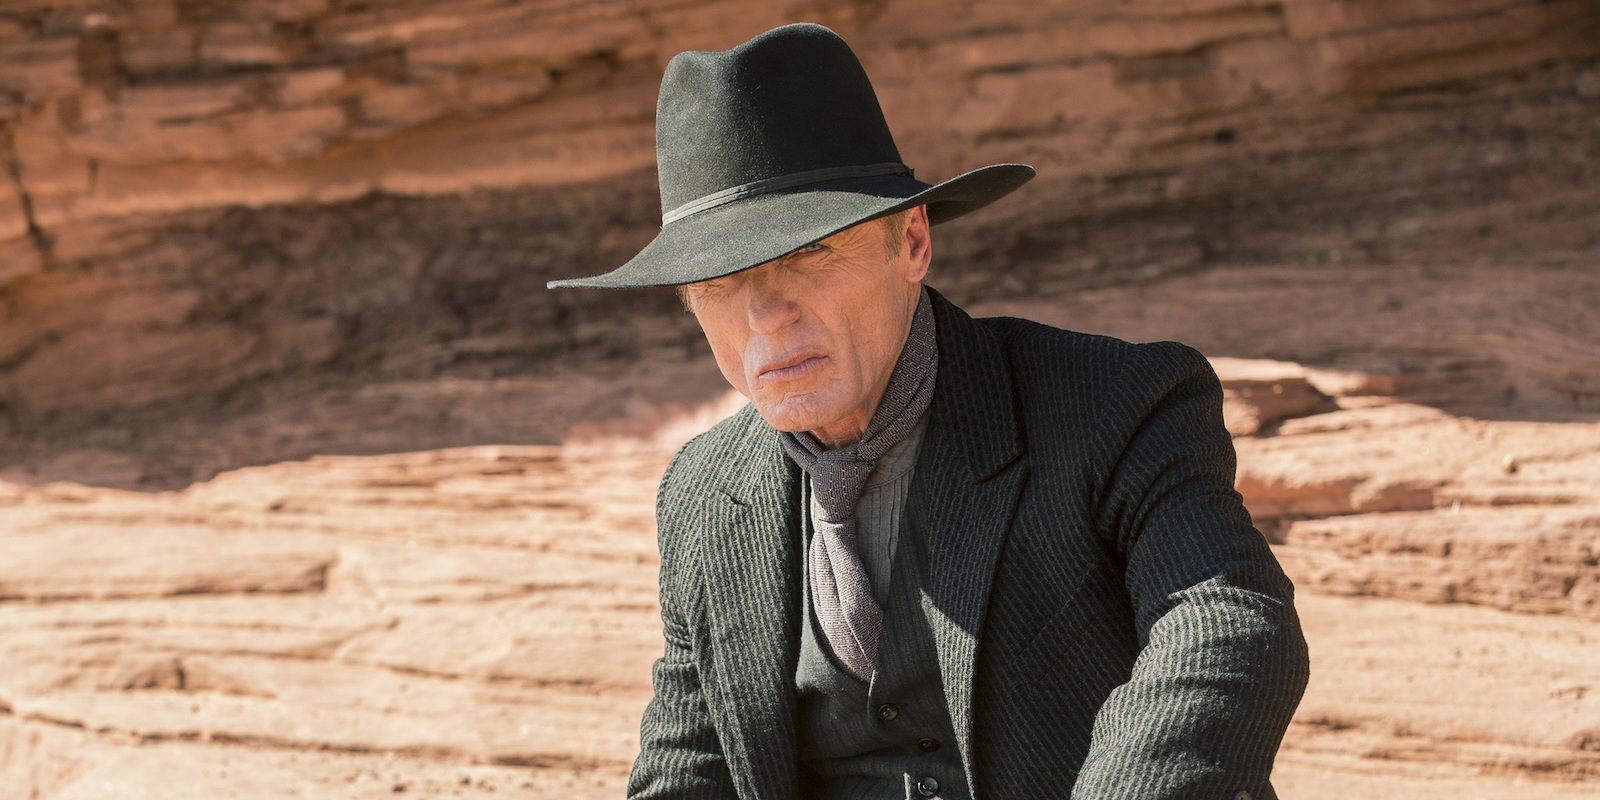  Ed Harris as The Man in Black crouched in a canyon in Westworld